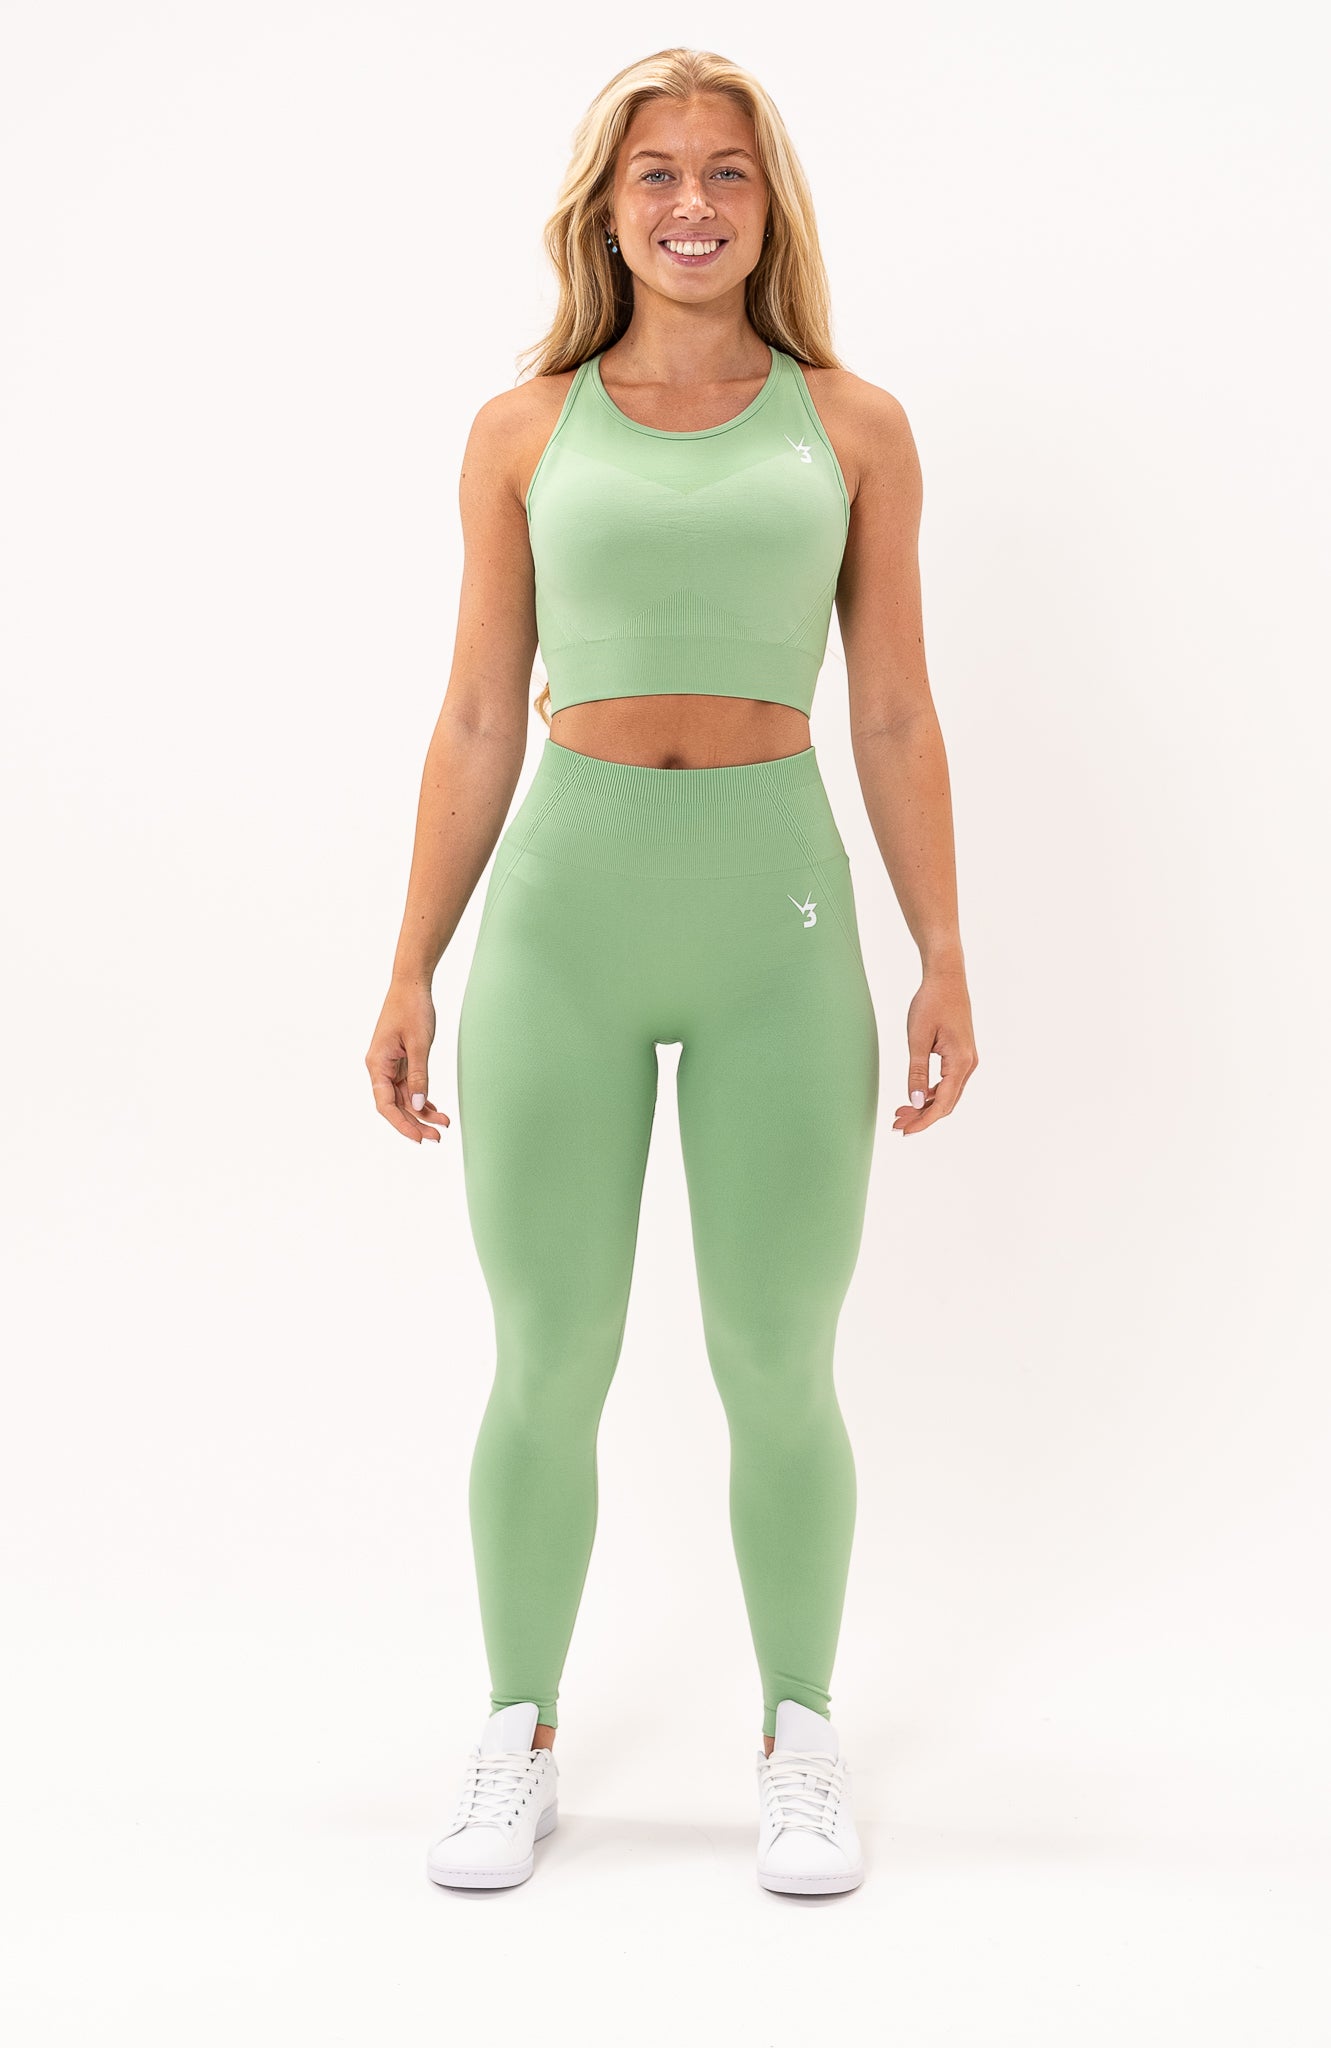 V3 Apparel Women's Tempo seamless scrunch bum shaping high waisted leggings and training sports bra in mint green – Squat proof sports tights and training bra for Gym workouts training, Running, yoga, bodybuilding and bikini fitness.